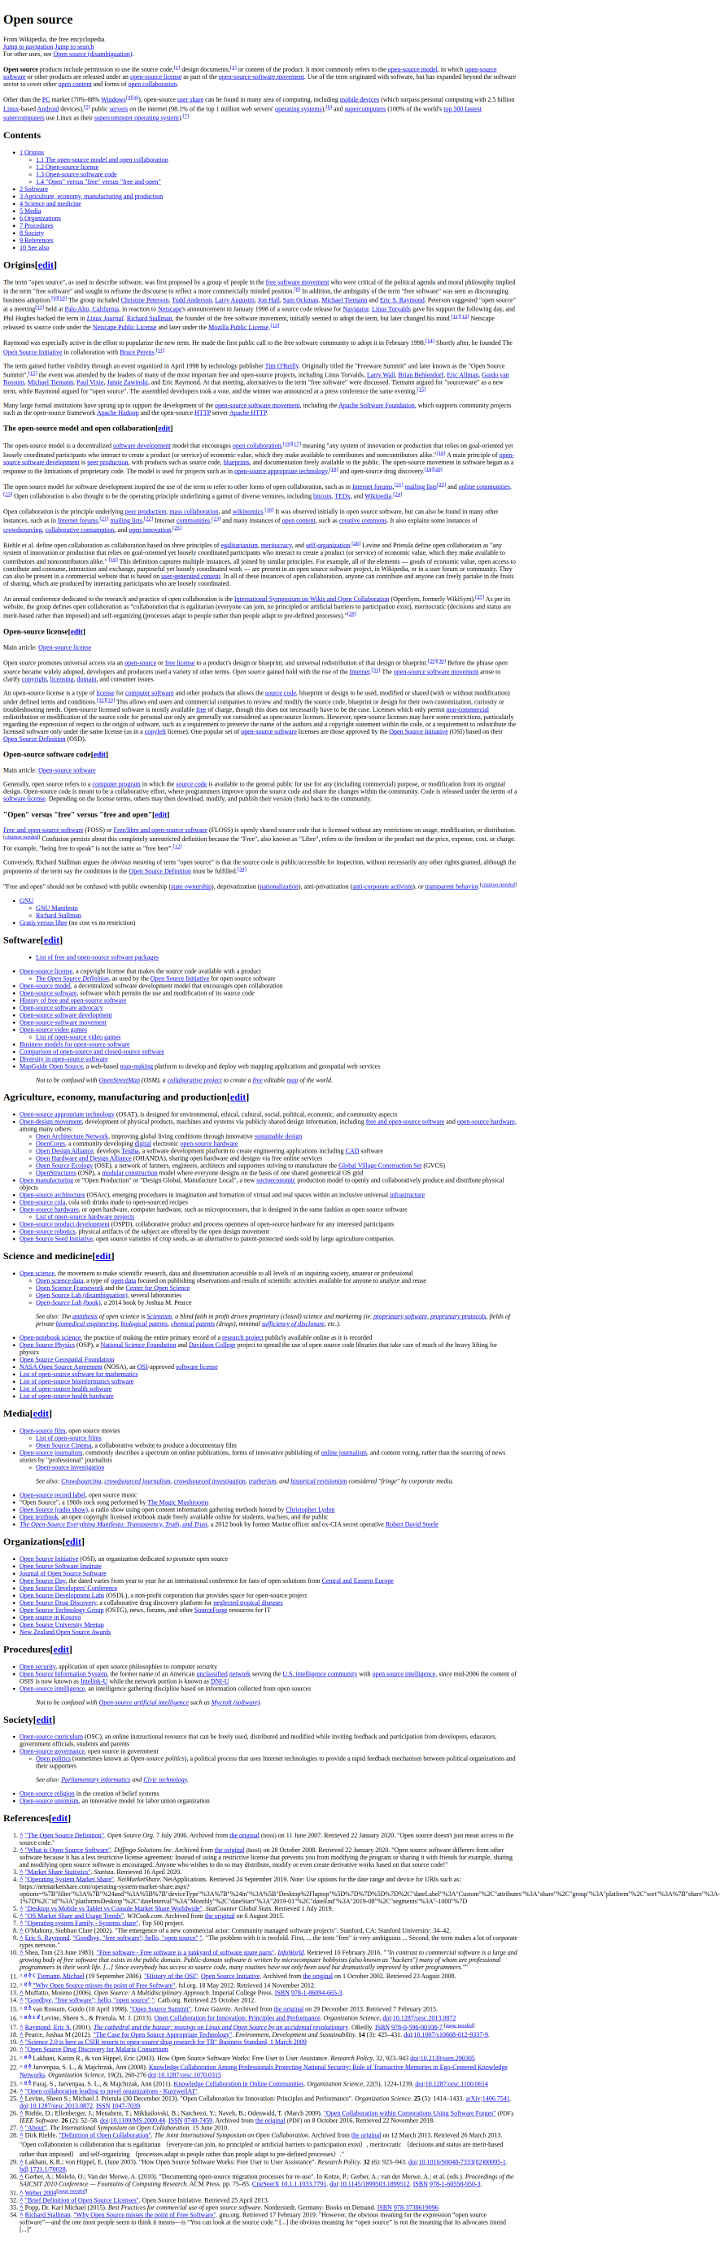 full page screenshot of a html-only version of wikipedia page